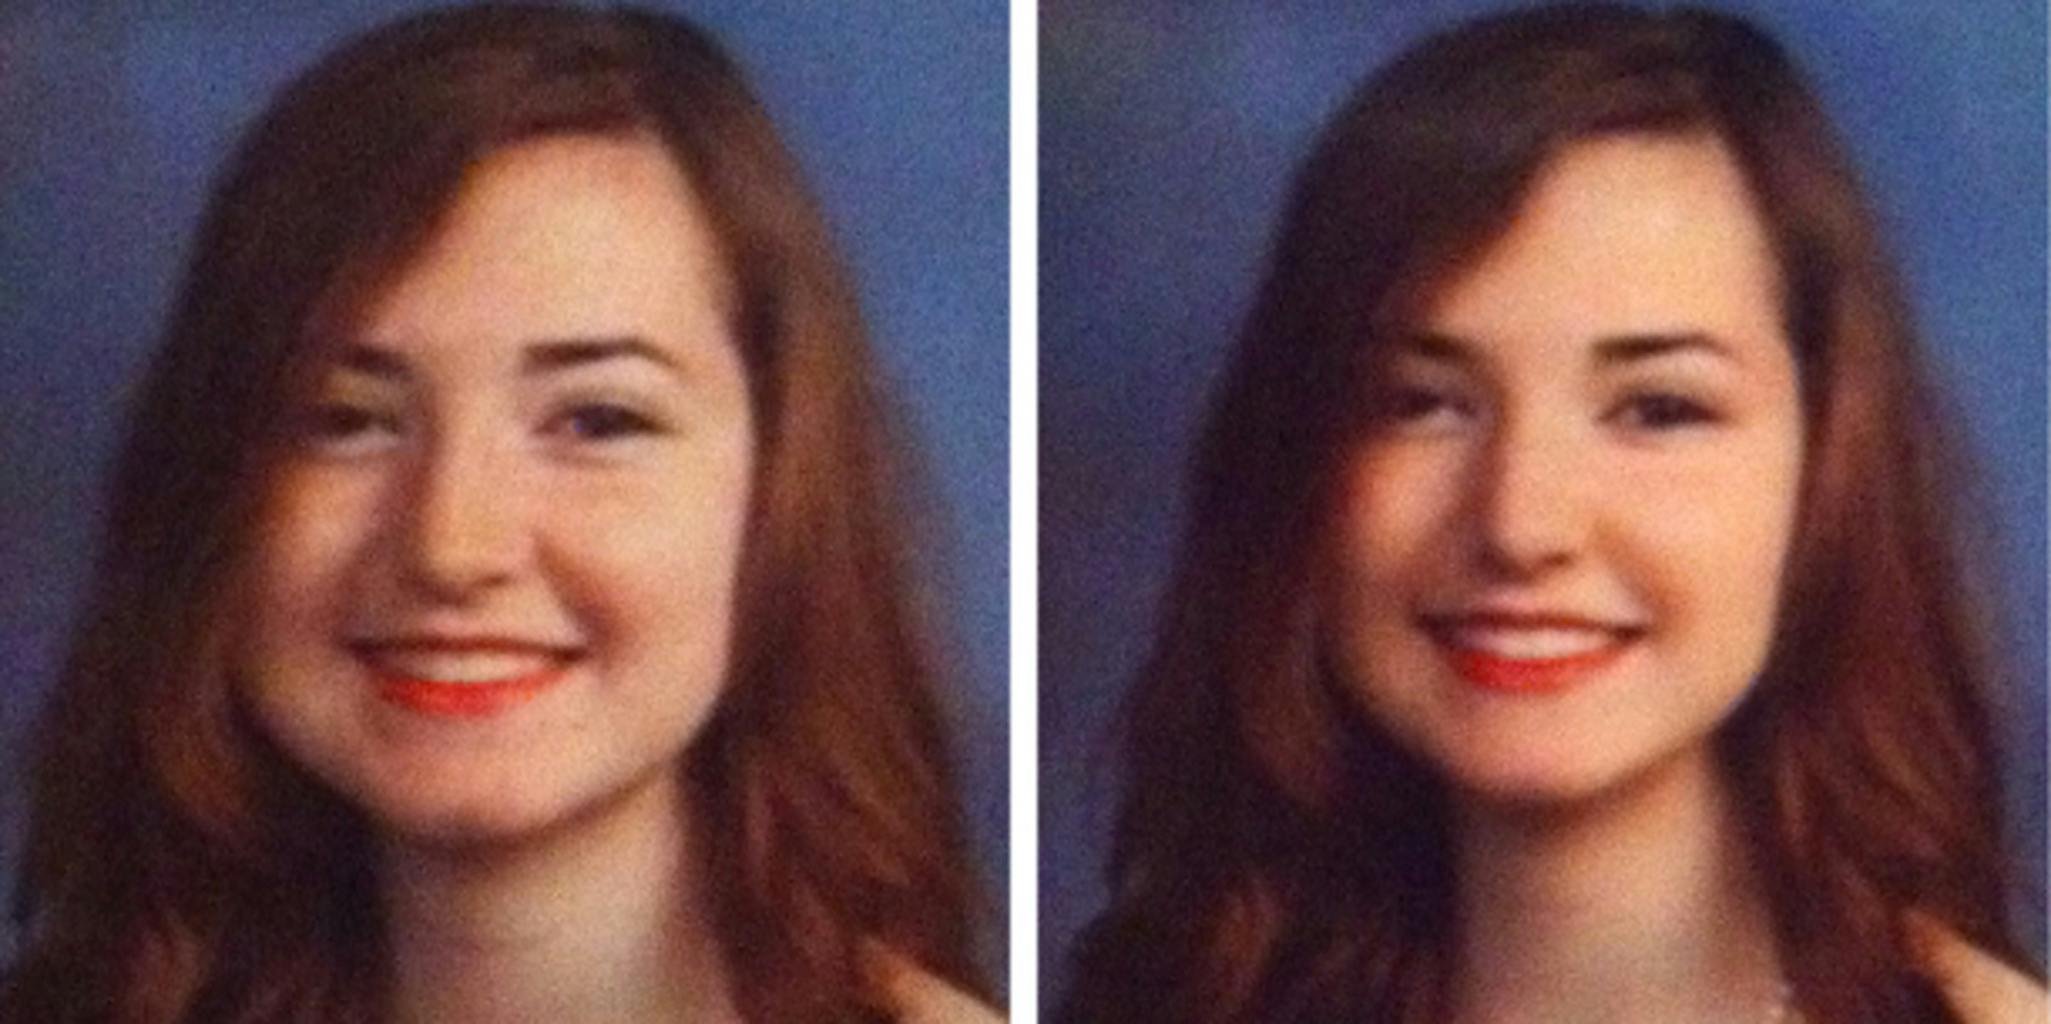 Professionally Altered Yearbook Photo Sparks Outrage